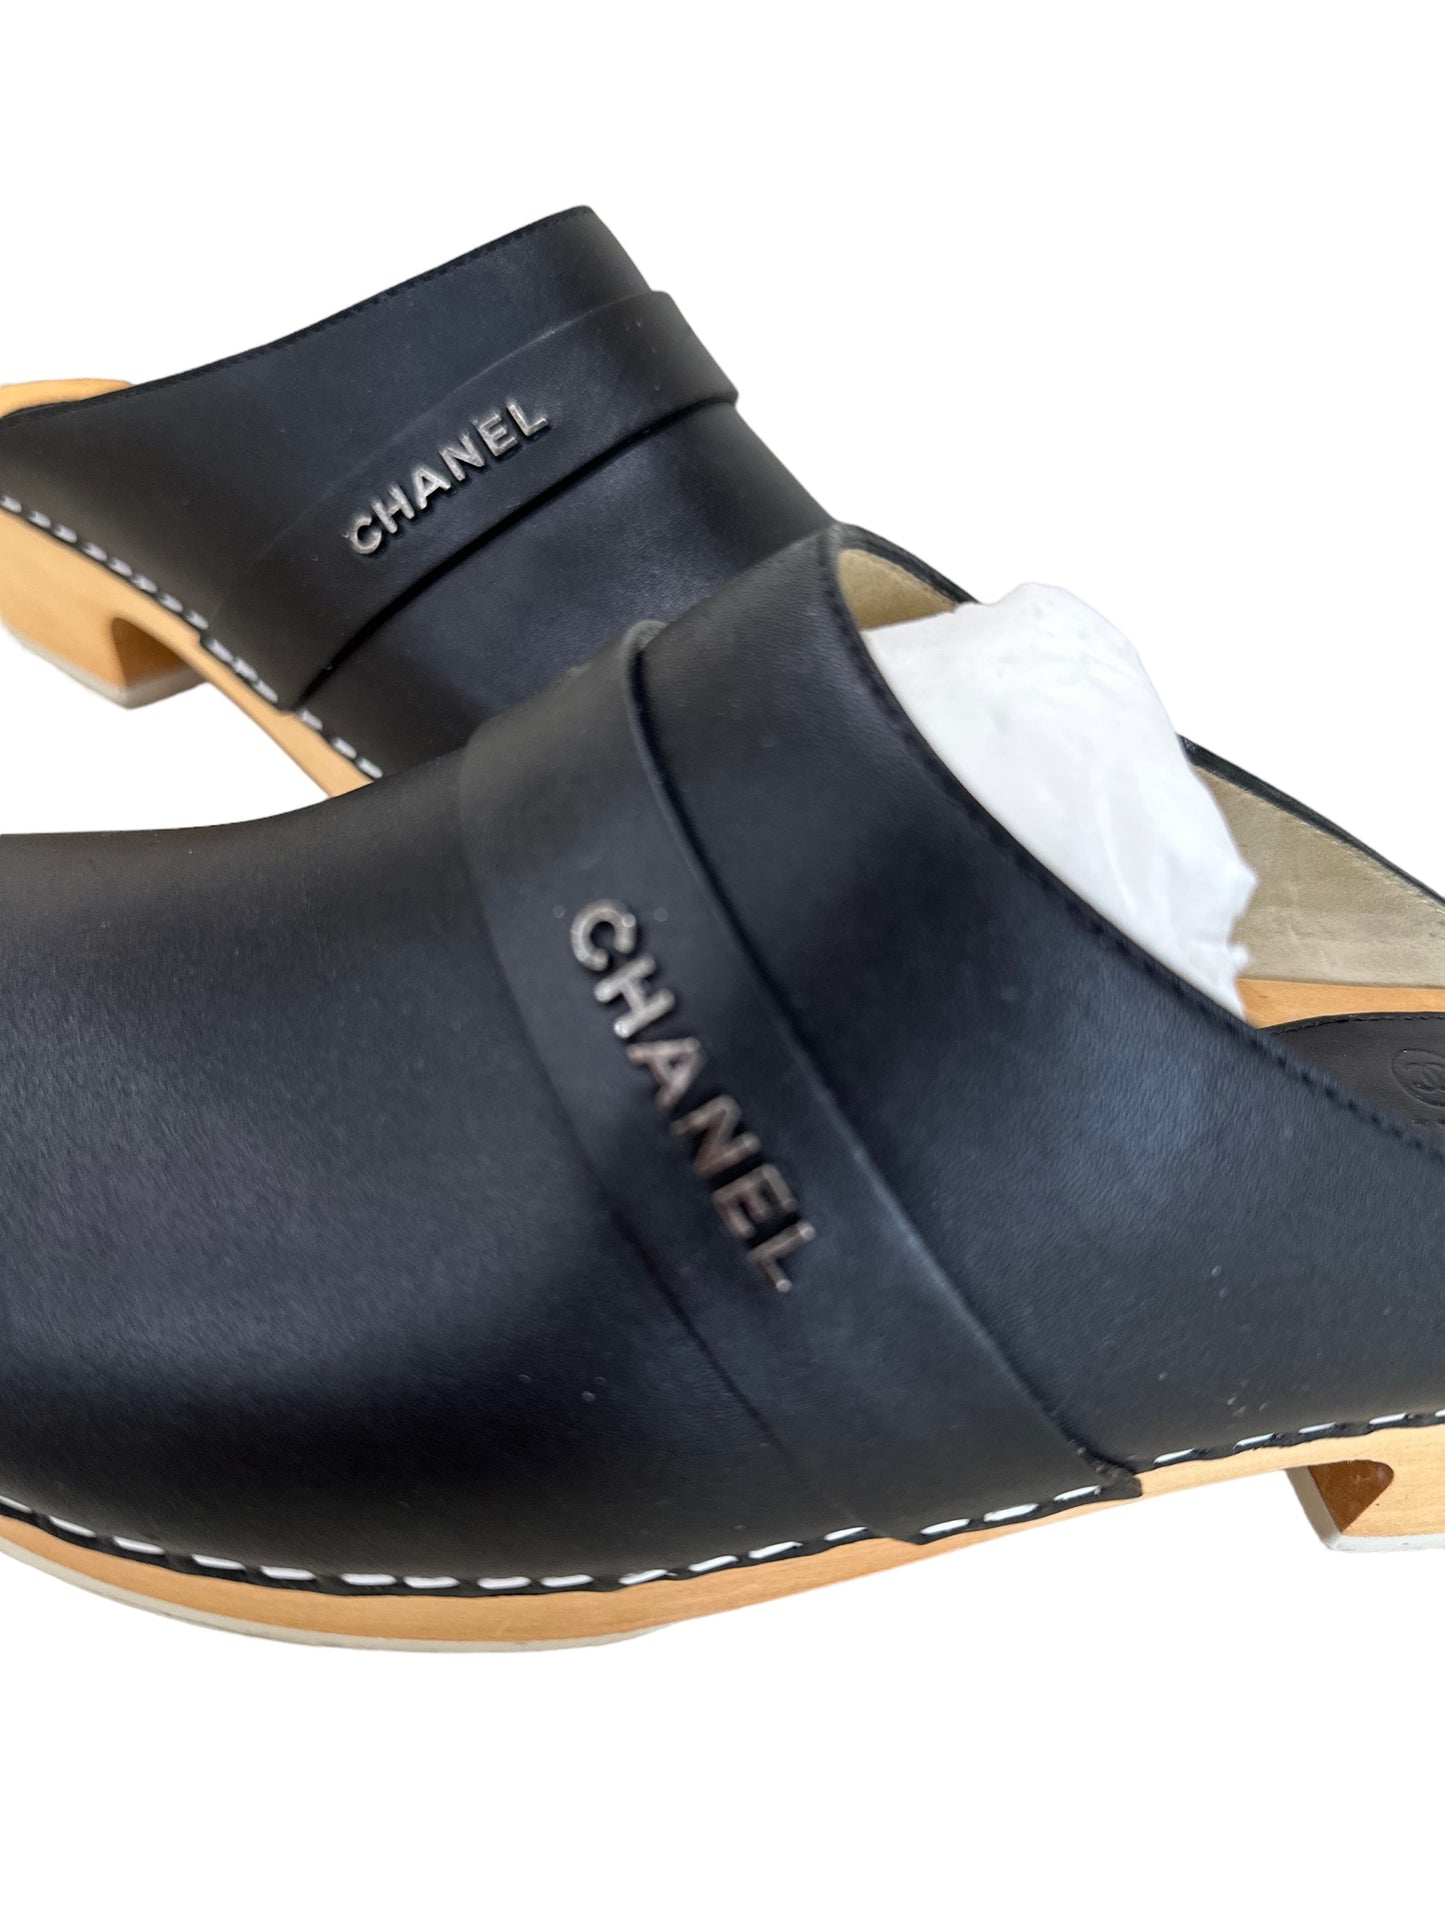 Chanel 2012 black clog mules 38.5 in box